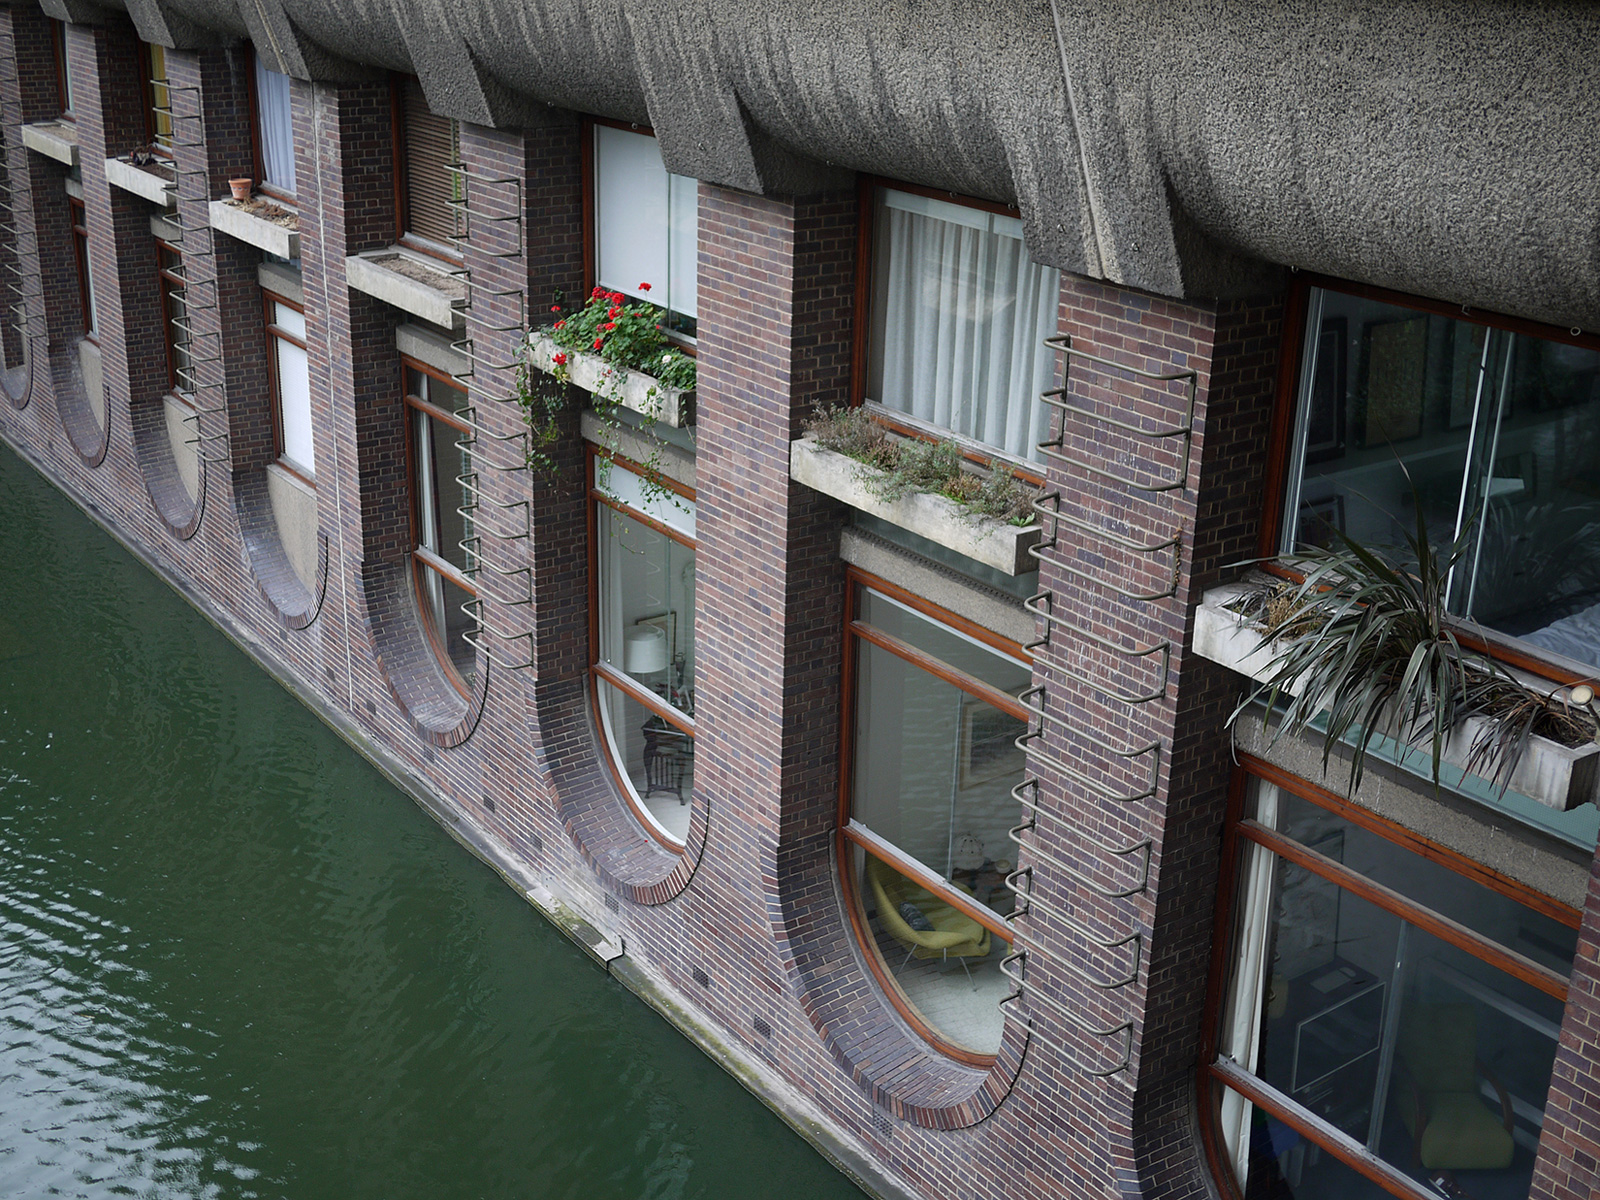 This Brutal House: Barbican Estate, flats overlooking the water